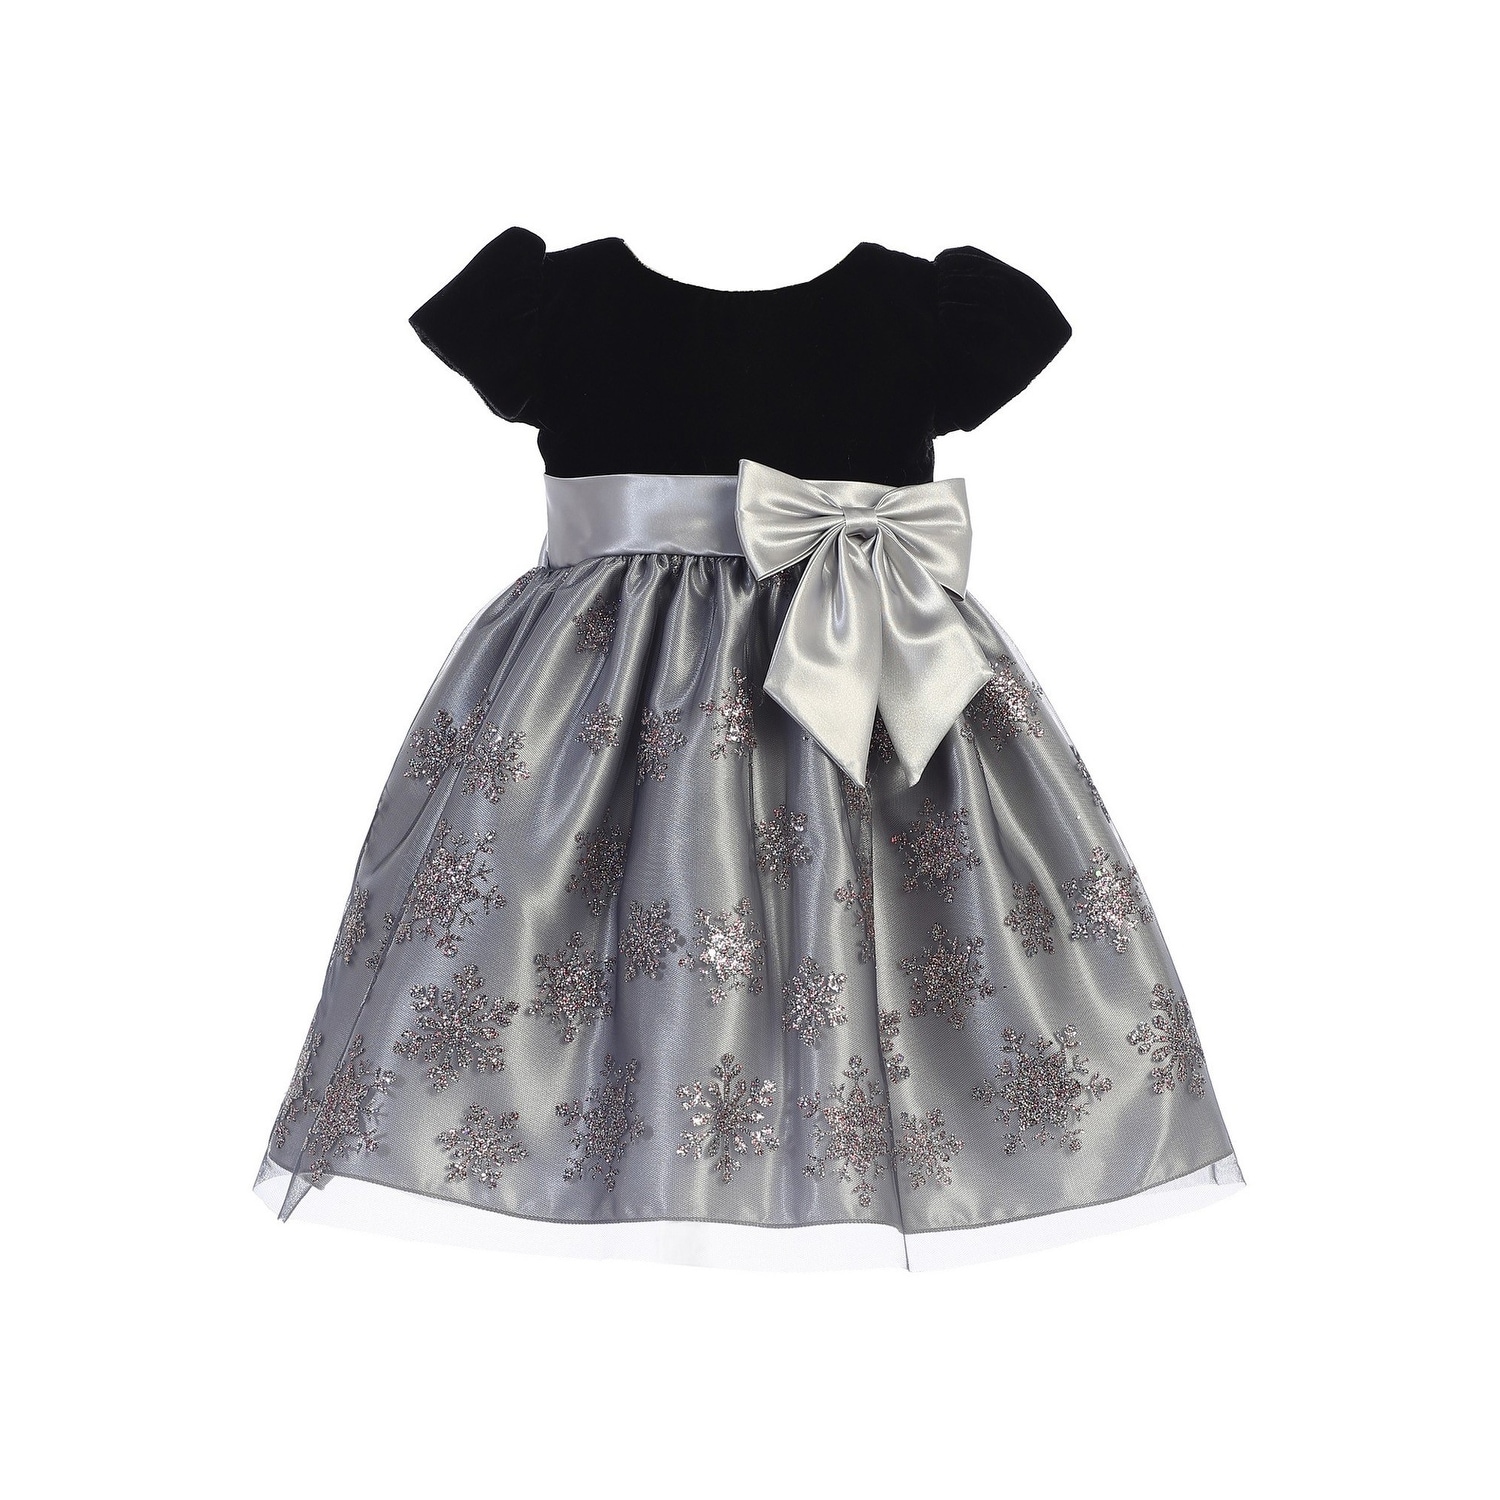 tulle baby dress